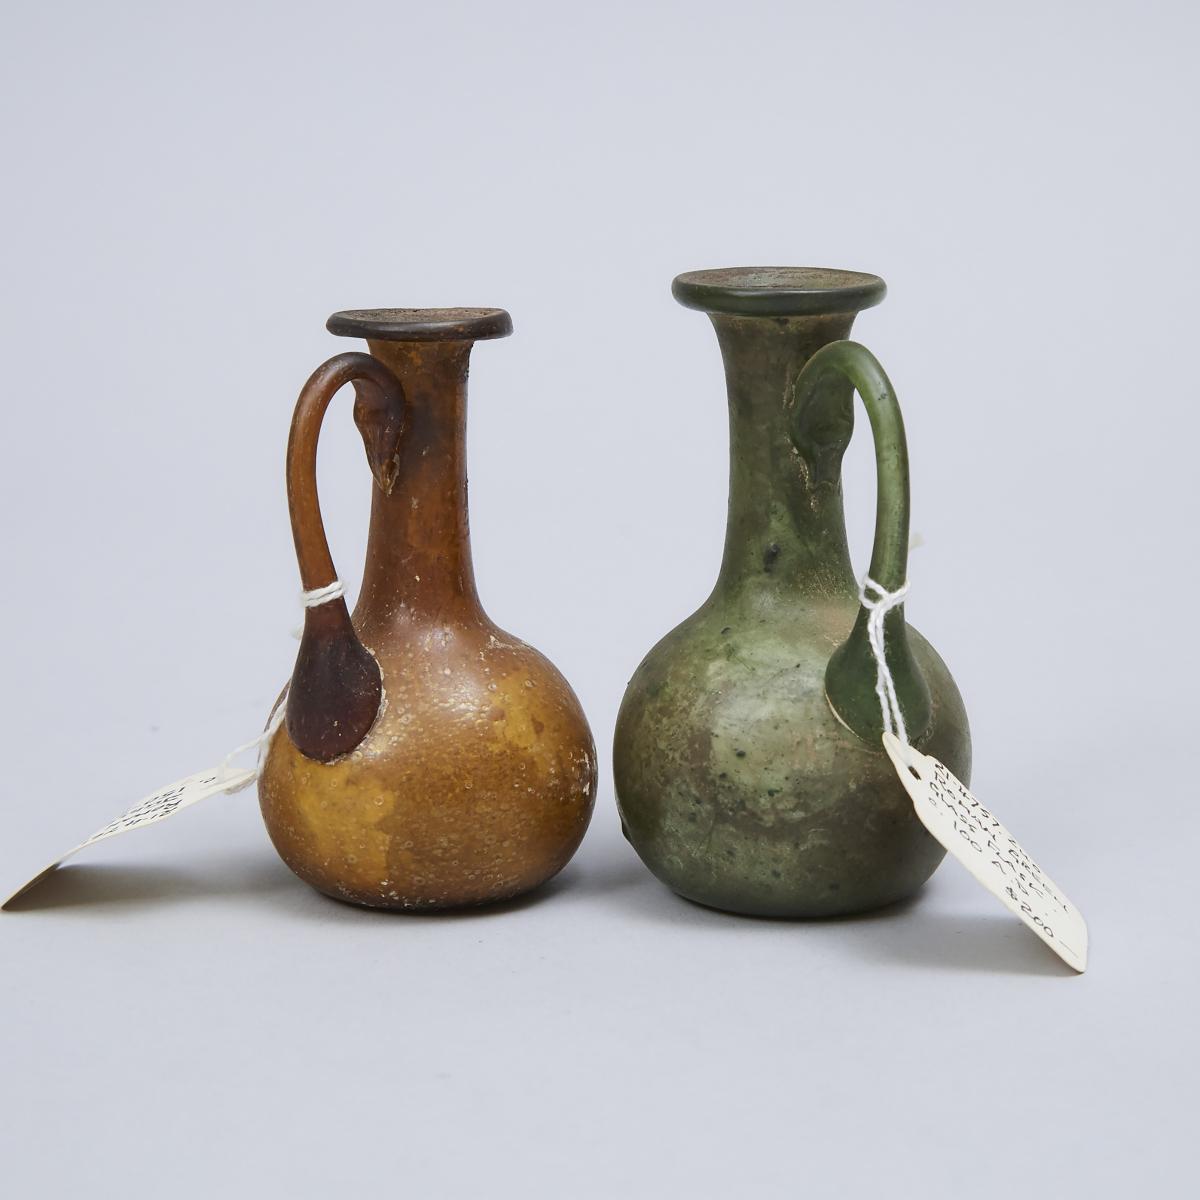 Two Roman Glass Juglets, 100-200 A.D., height 3.7 in — 9.5 cm - Image 2 of 5